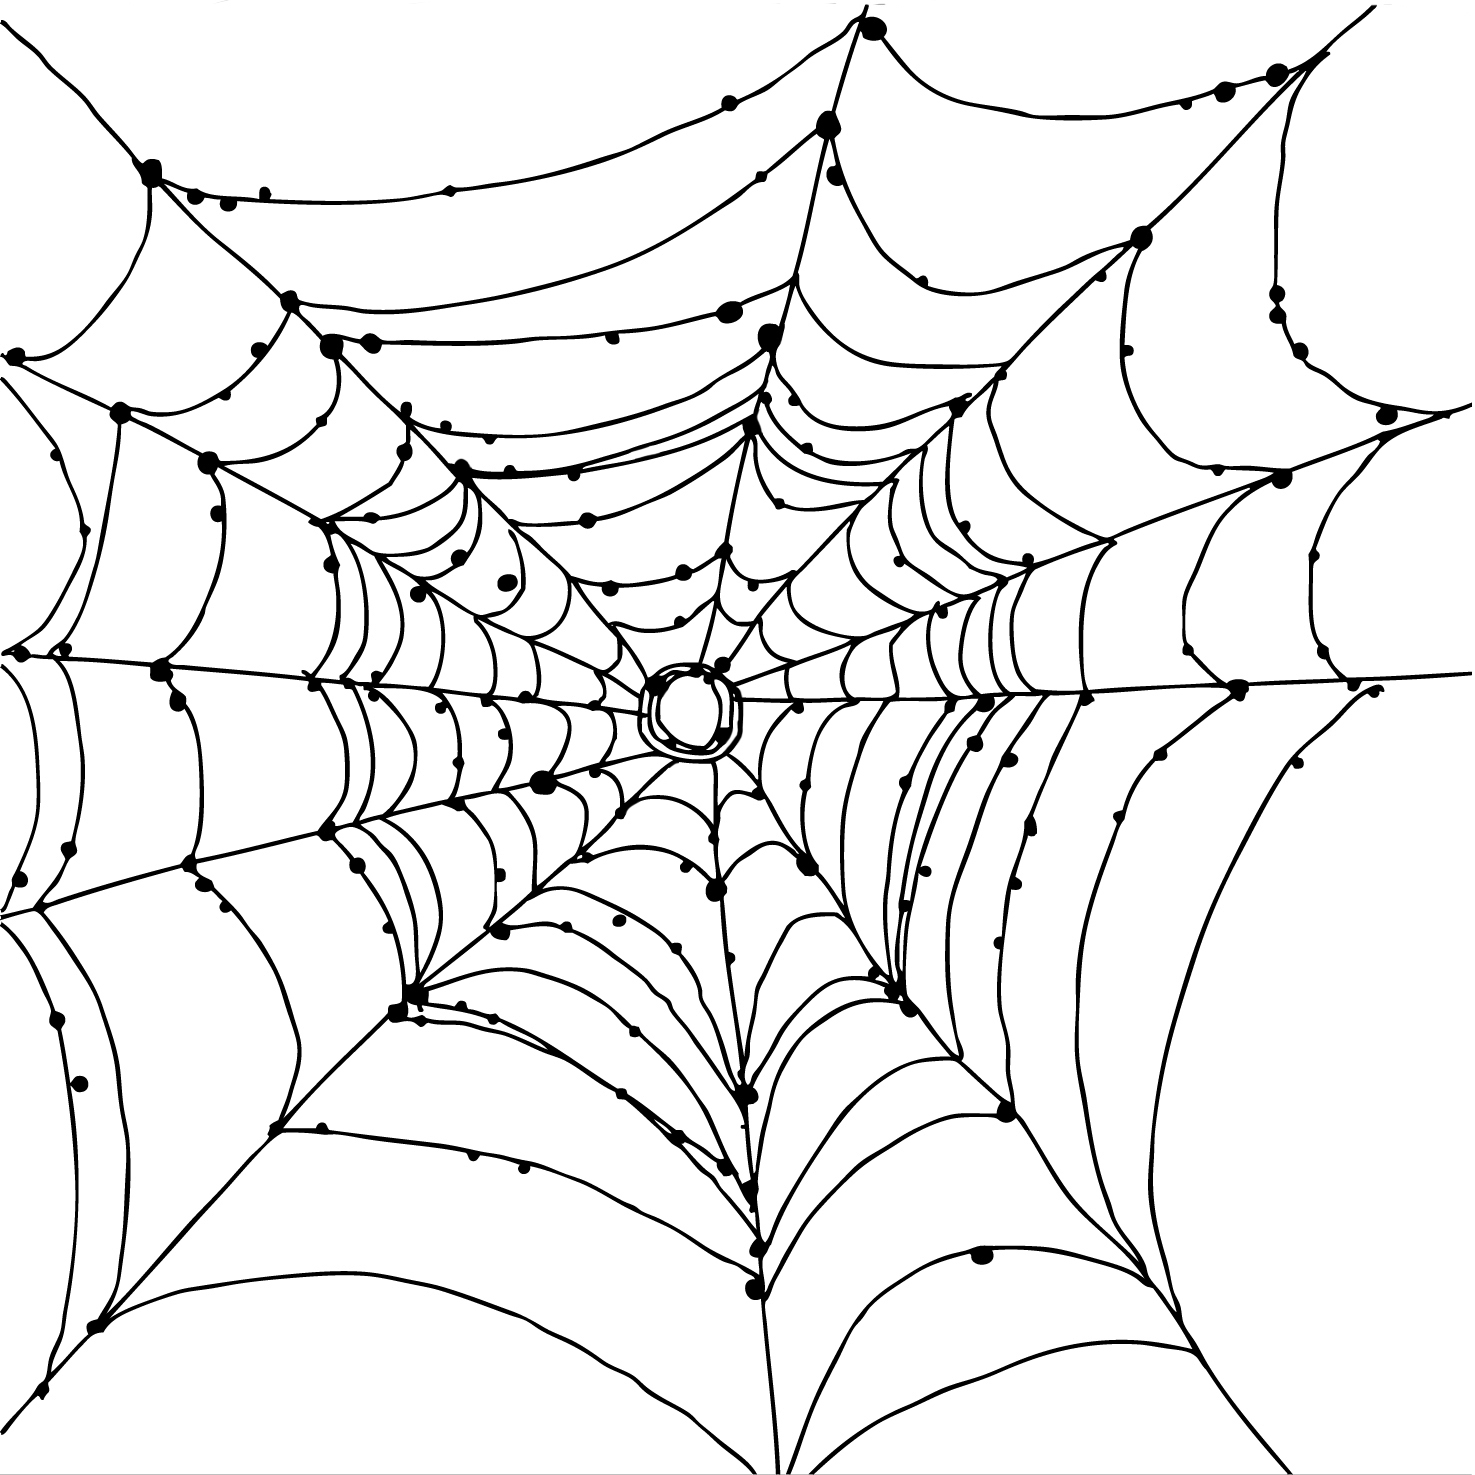 Spider Web coloring #1, Download drawings